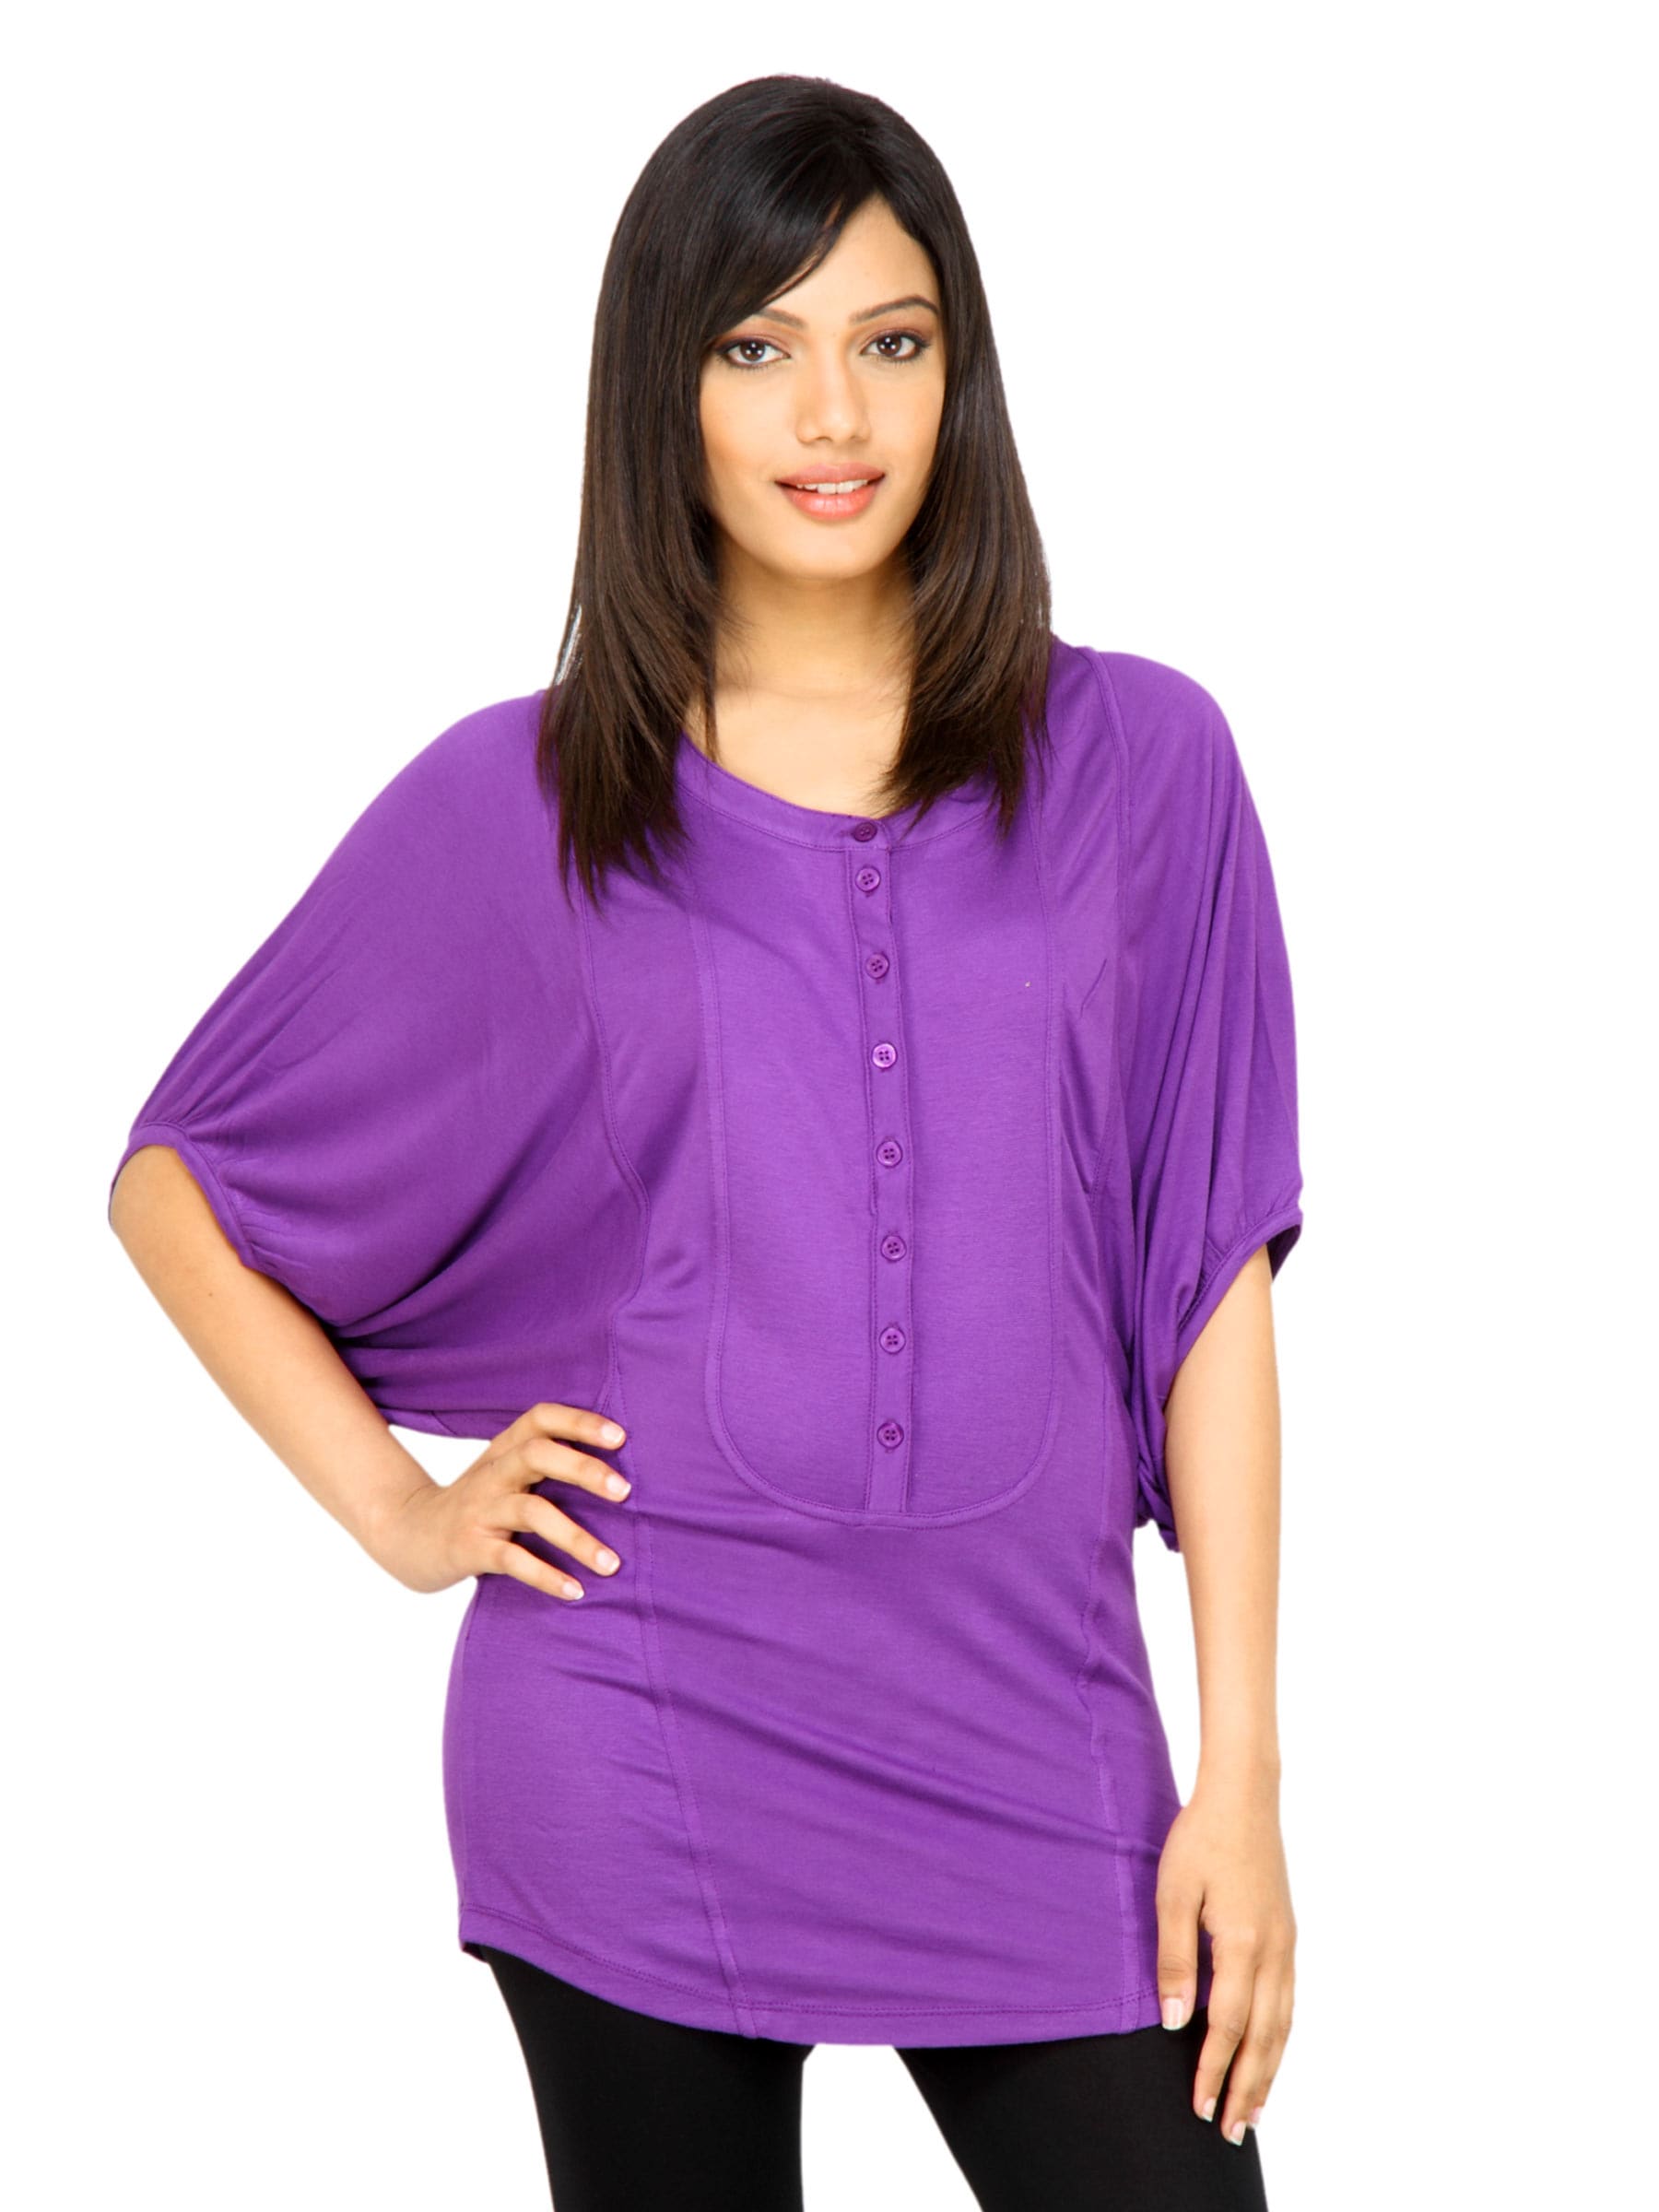 United Colors of Benetton Women Solid Purple Top